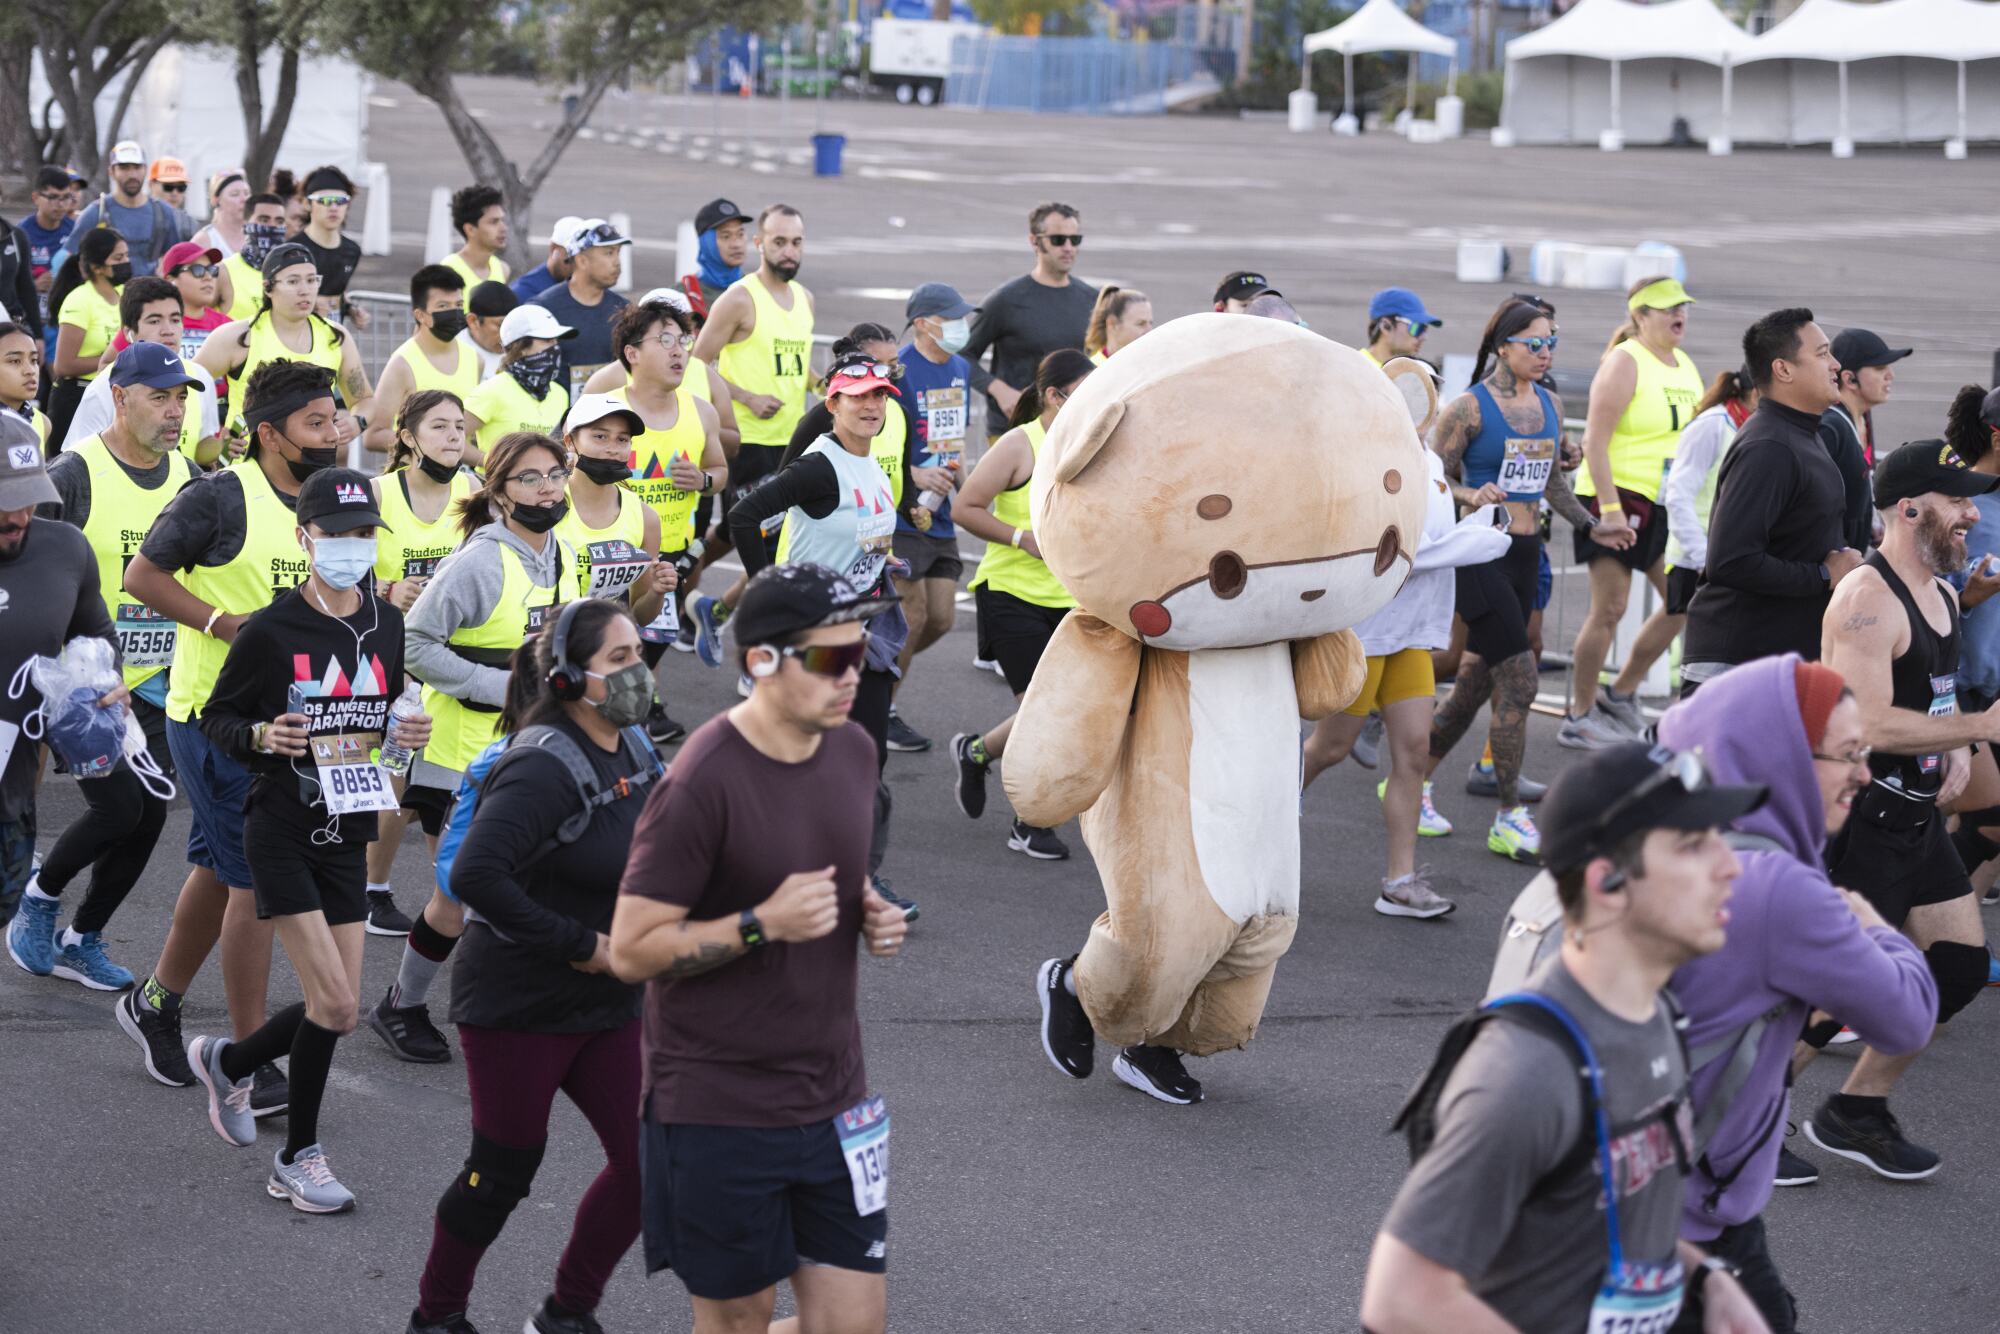 A runner with an animated bear costume participates during the 37th annual Los Angeles Marathon.